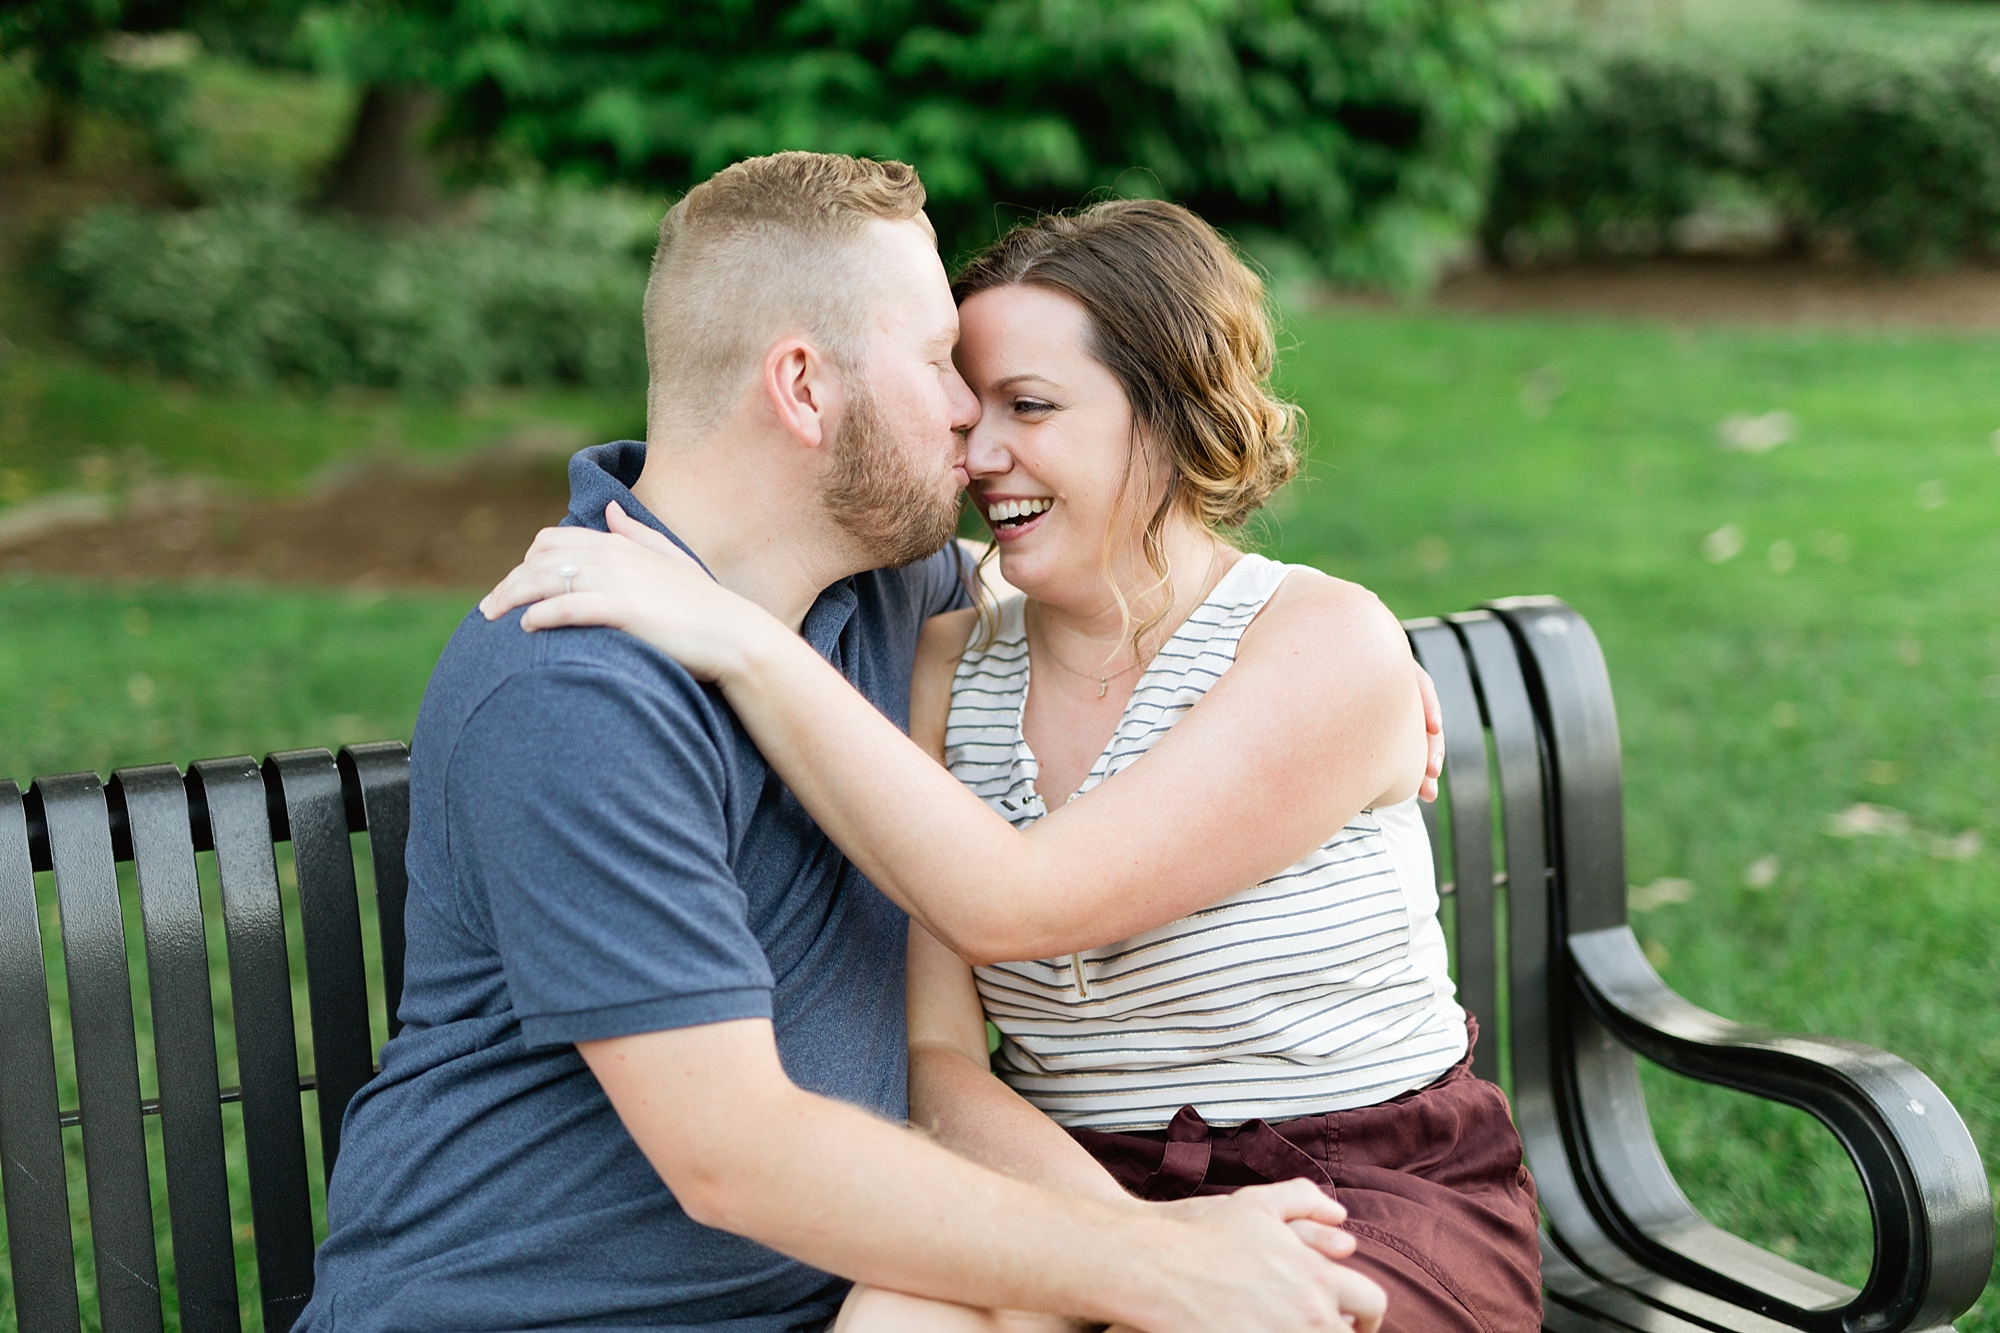 A summer golden hour engagement session at George George Park in Metro Detroit, Michigan by Breanne Rochelle Photography.